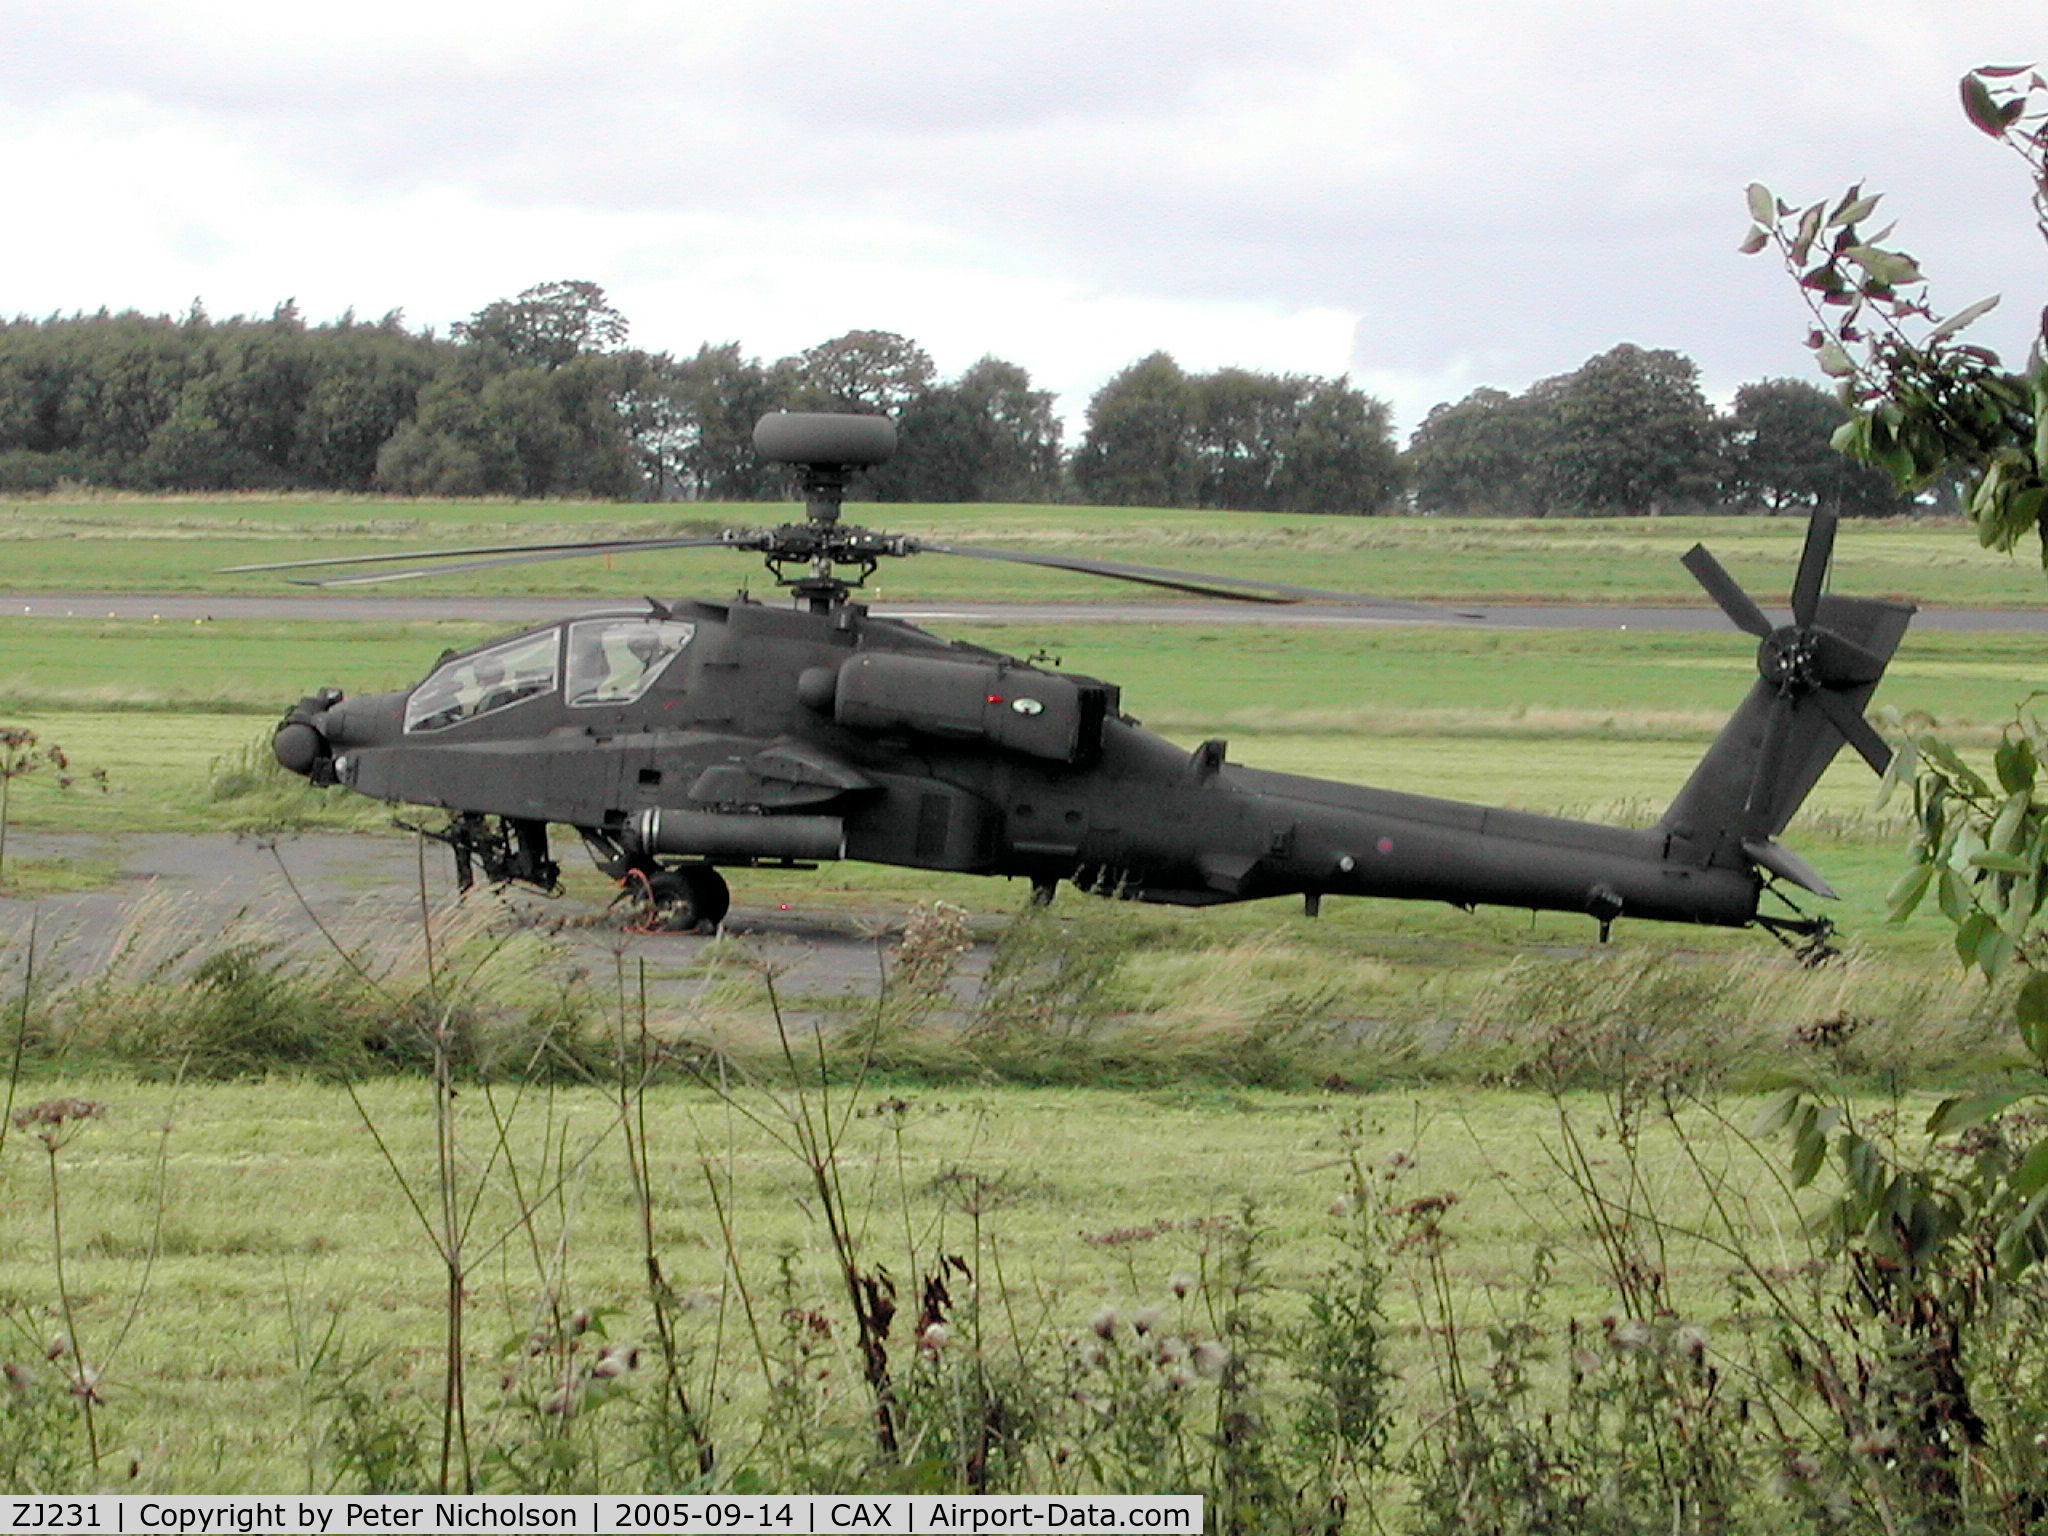 ZJ231, 2004 Westland Apache AH.1 C/N DU065/WAH065, Apache AH.1, Callsign Ransack One, of 664 Squadron Army Air Corps seen at Carlisle on Exercise Wycombe Warrior in September 2005.